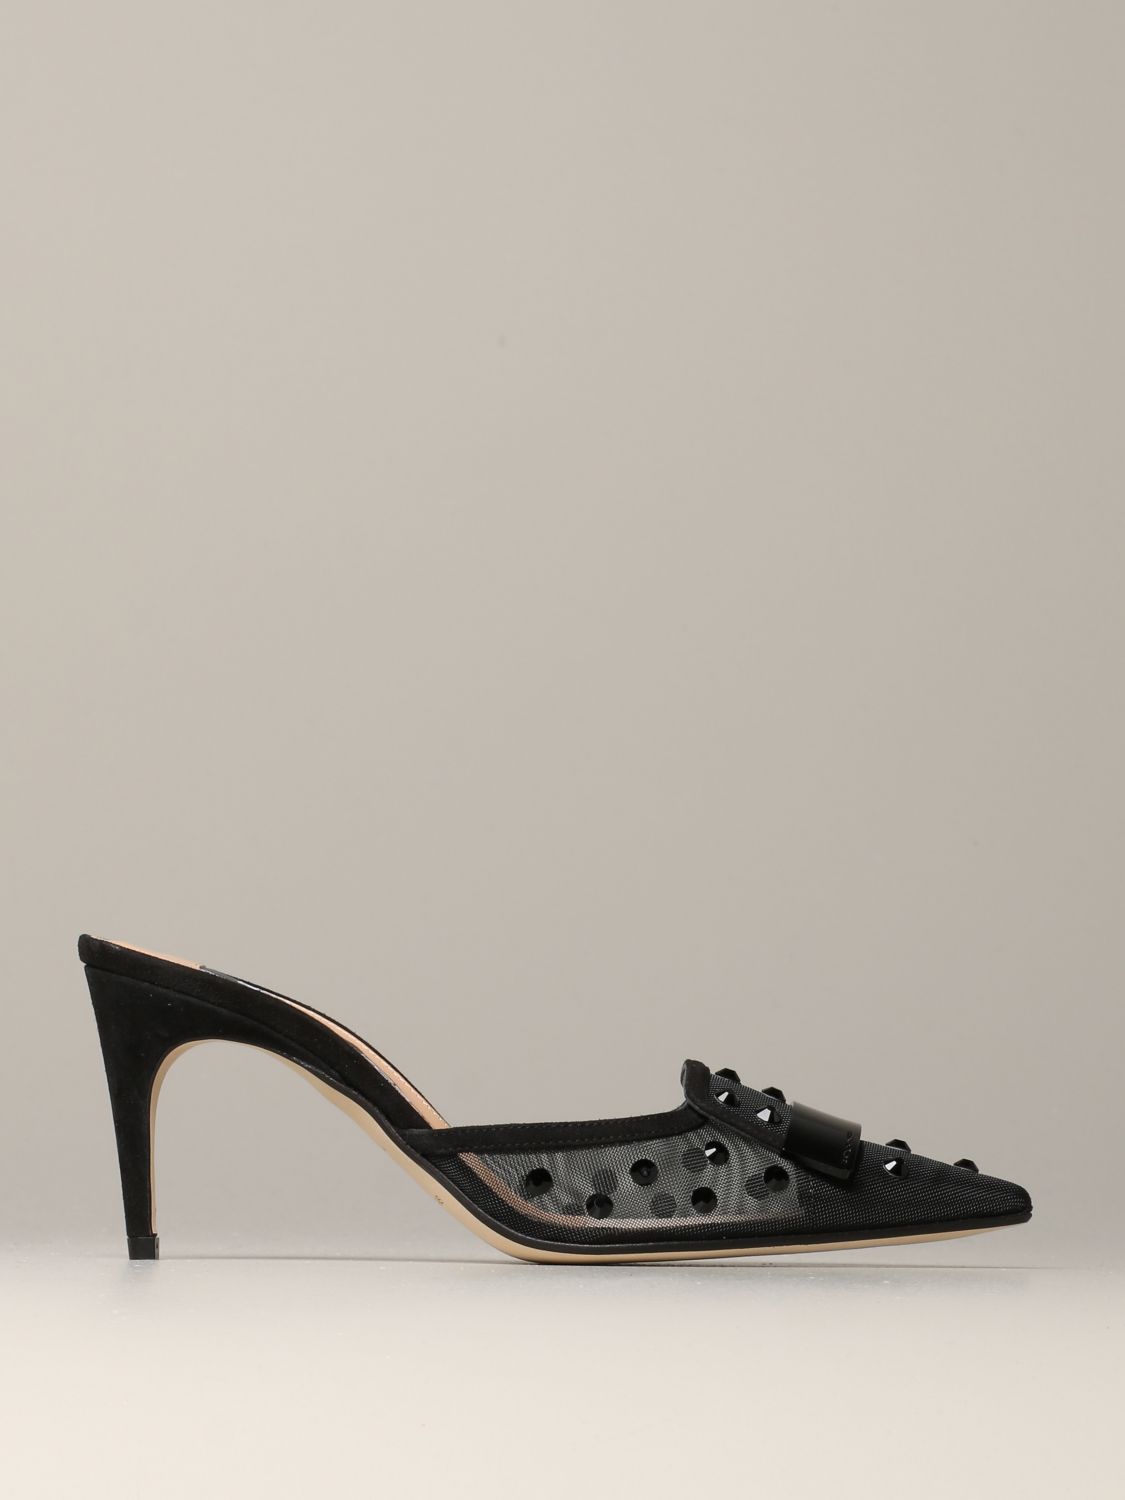 Voetzool verhaal Zeker Sergio Rossi Outlet: pumps for woman - Black | Sergio Rossi pumps A90100  MAFM76 online on GIGLIO.COM